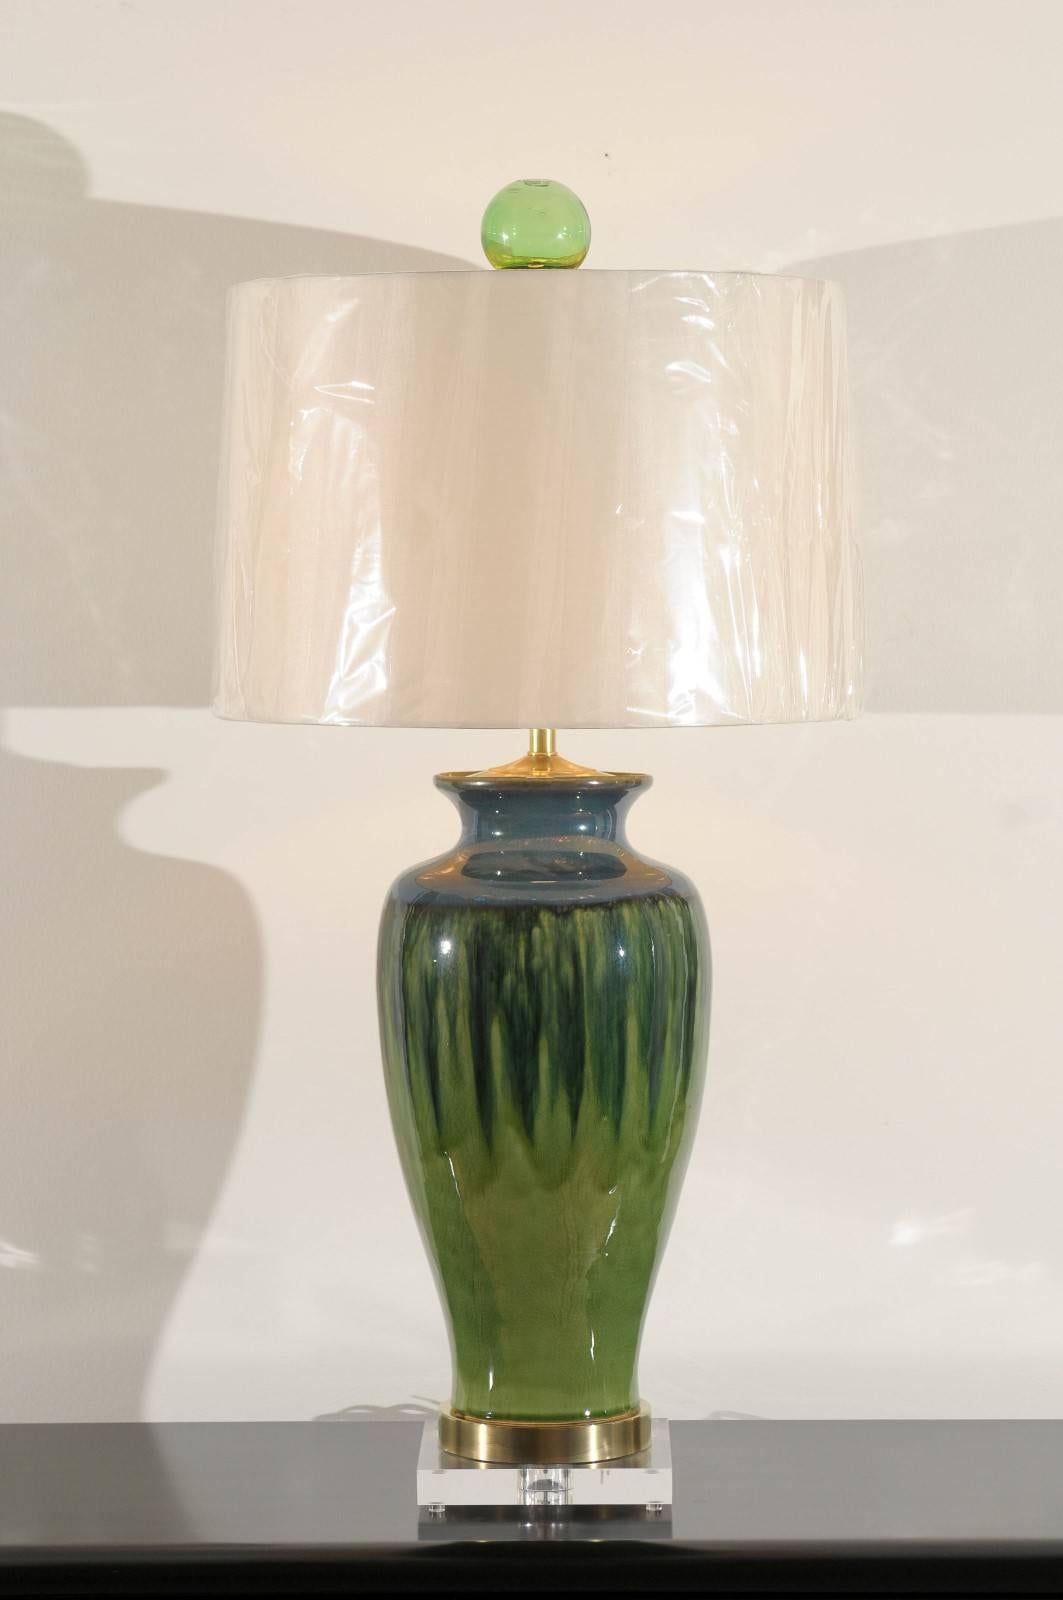 These magnificent lamps have been professionally restored and are shipped as photographed and described, complete with new shades, harps and finials.

A fabulous pair of large-scale vessels as custom lamps. Beautiful drip glaze ceramic form with